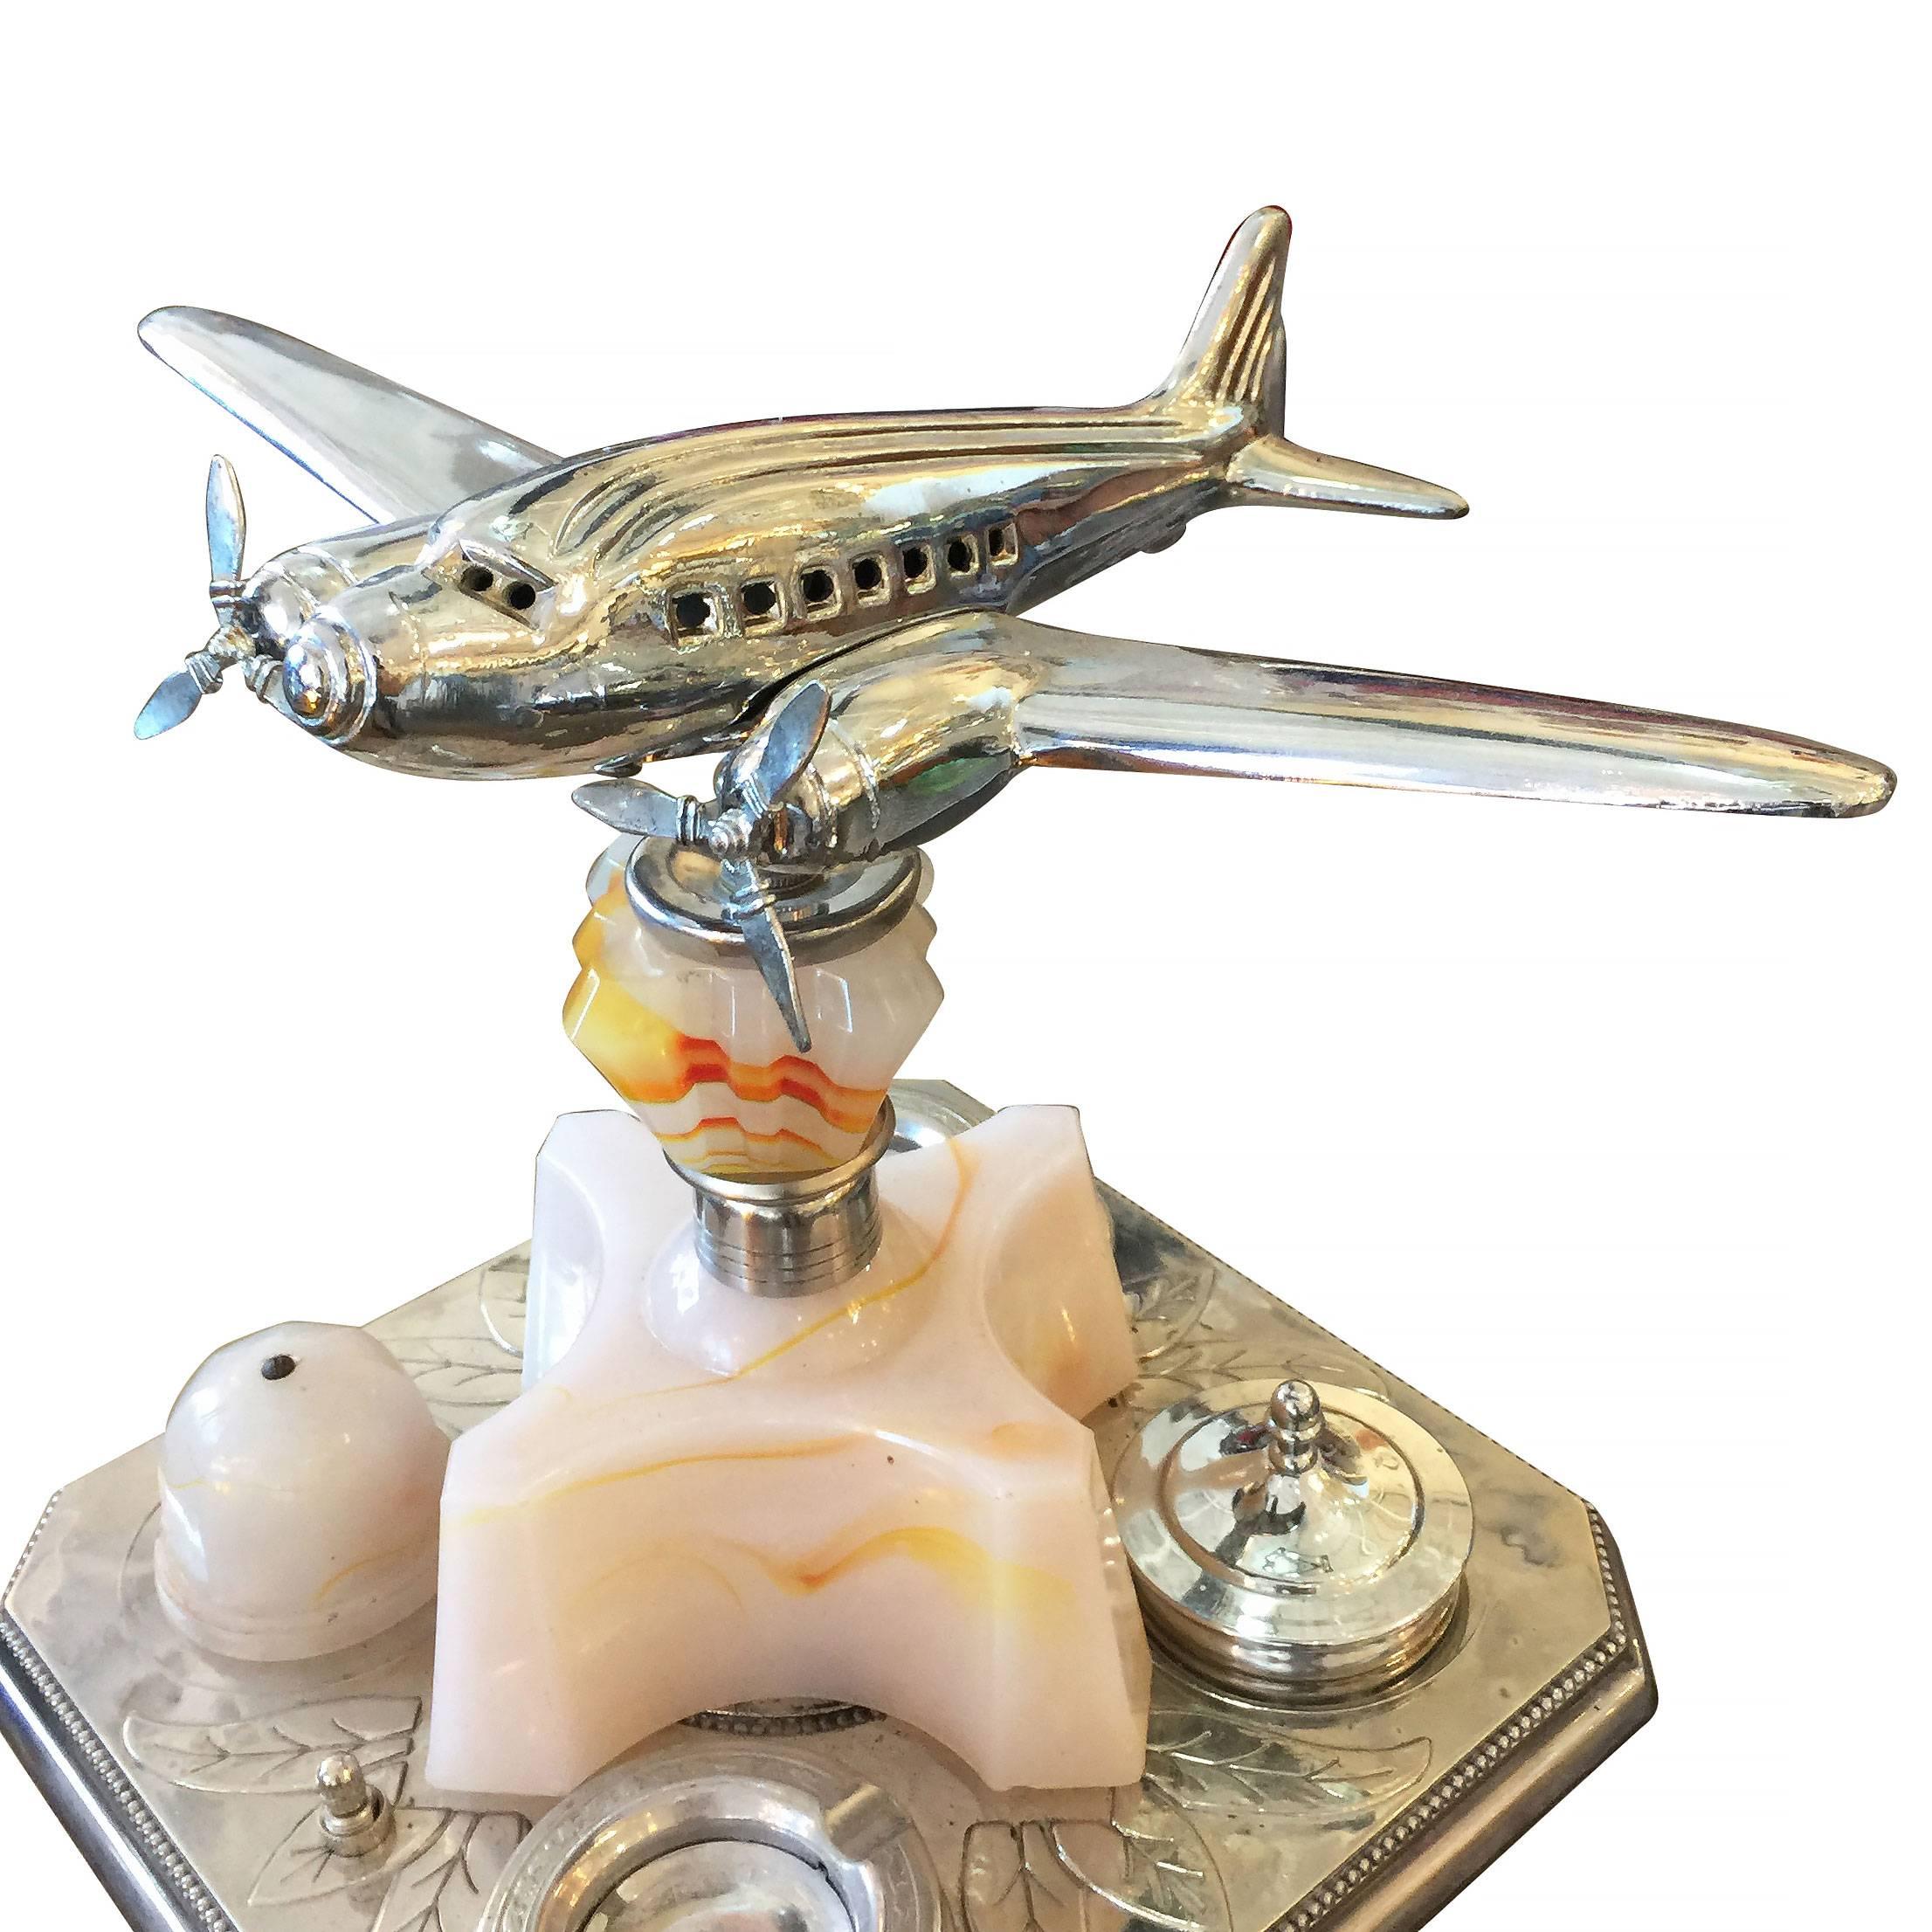 American Chrome and Art Deco Ashtray Stand with Light Up Plane